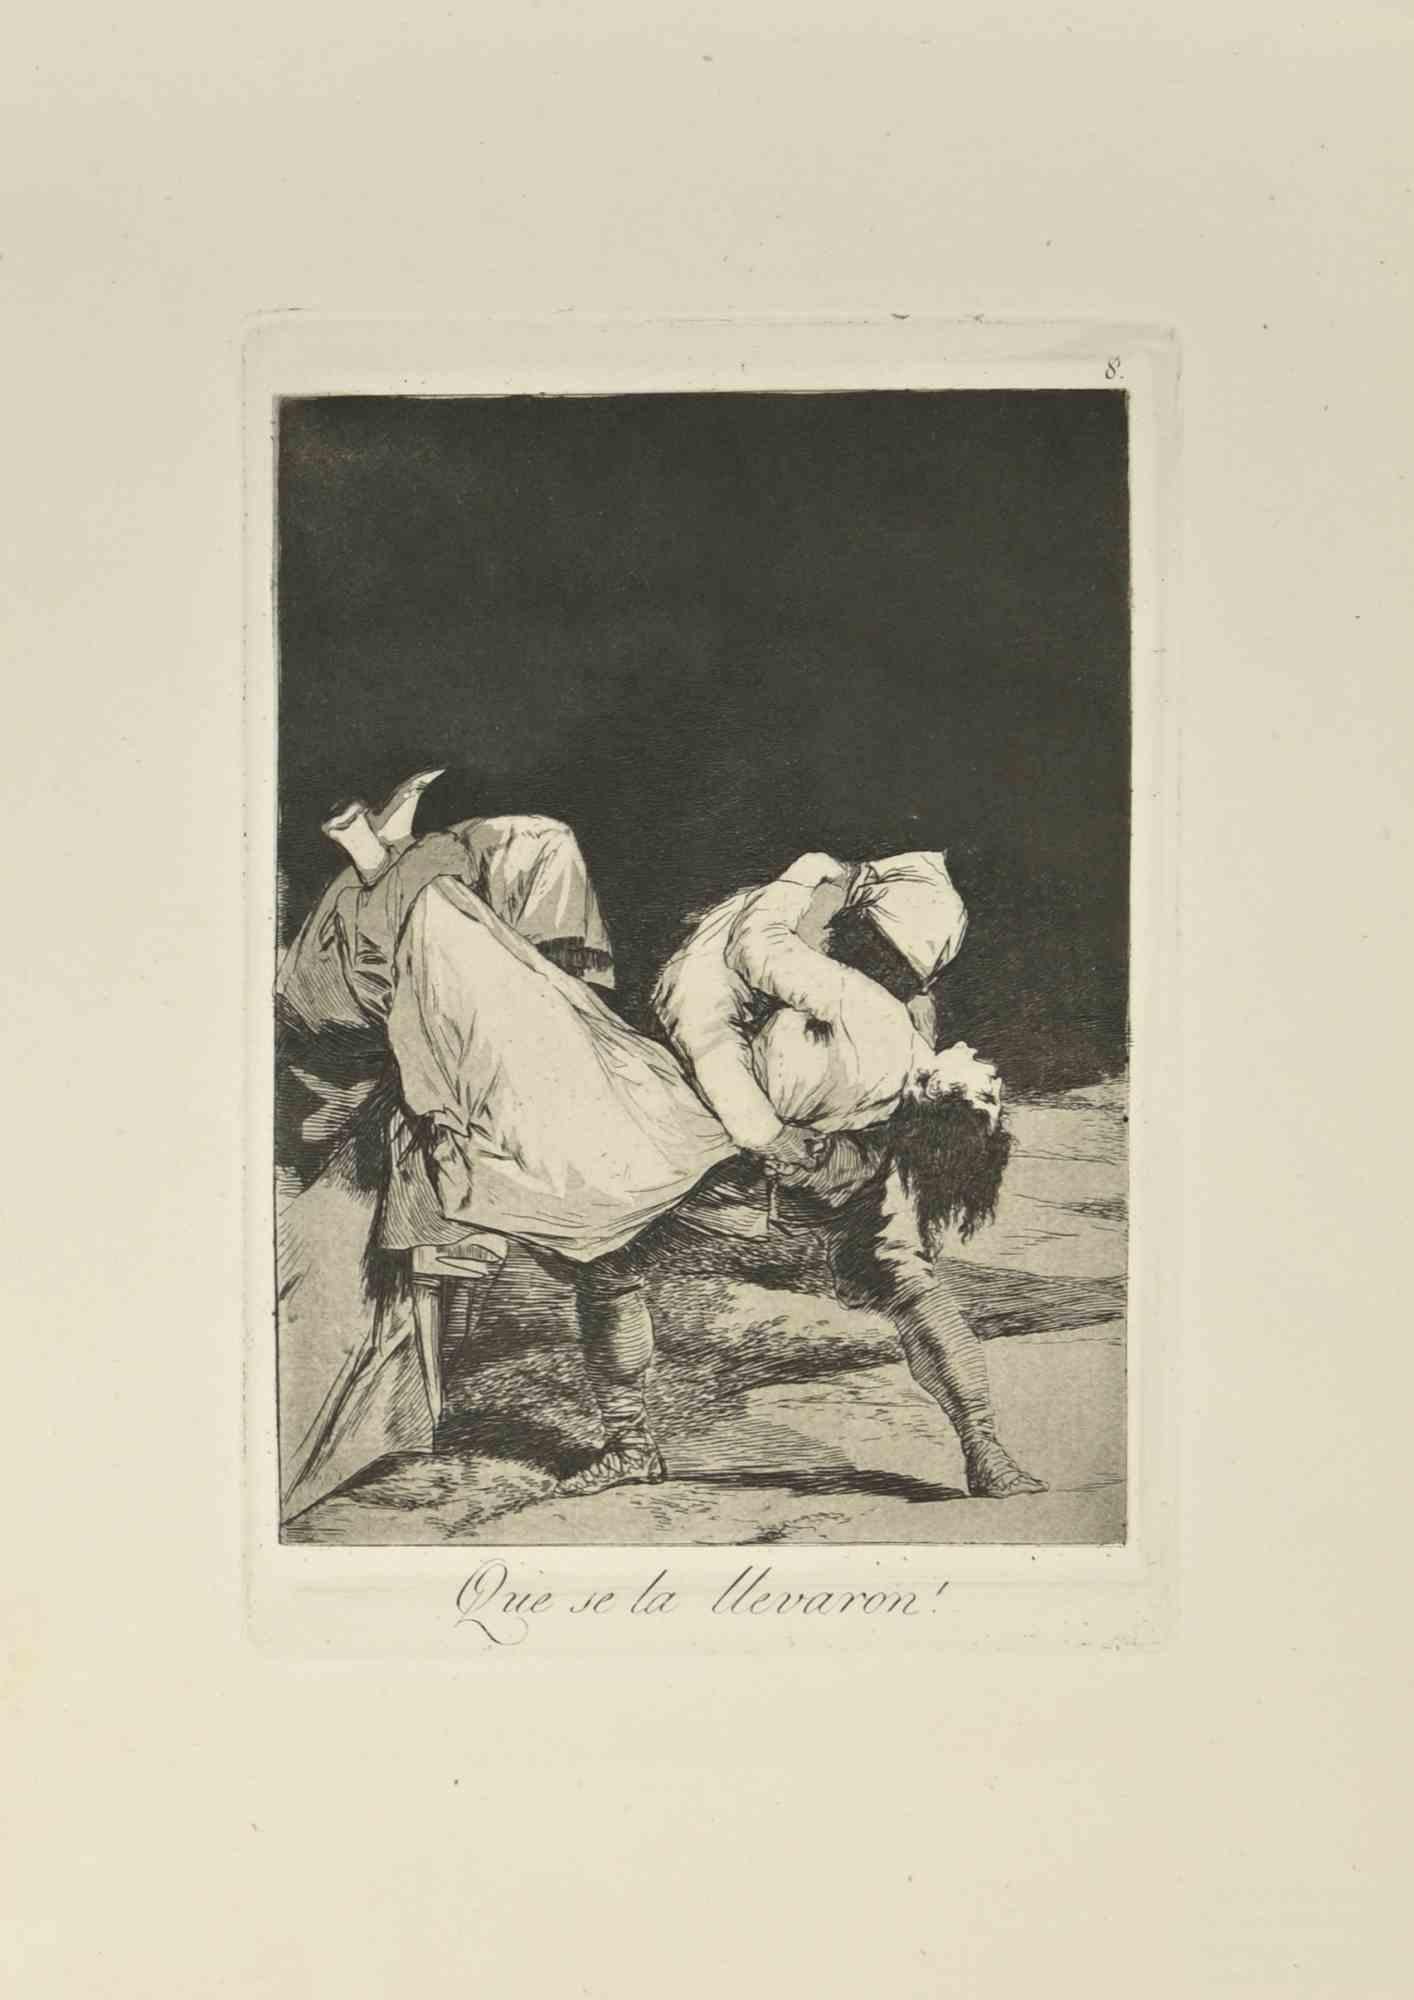 Que se a llevaron! is an artwork realized by Francisco Goya.

Etching cm. 20.5x13.

From Los Caprichos, Third Edition by Calcografia Cameral, 1868. 

Ref. Delteil 45; Harris 43.

Good condition.


